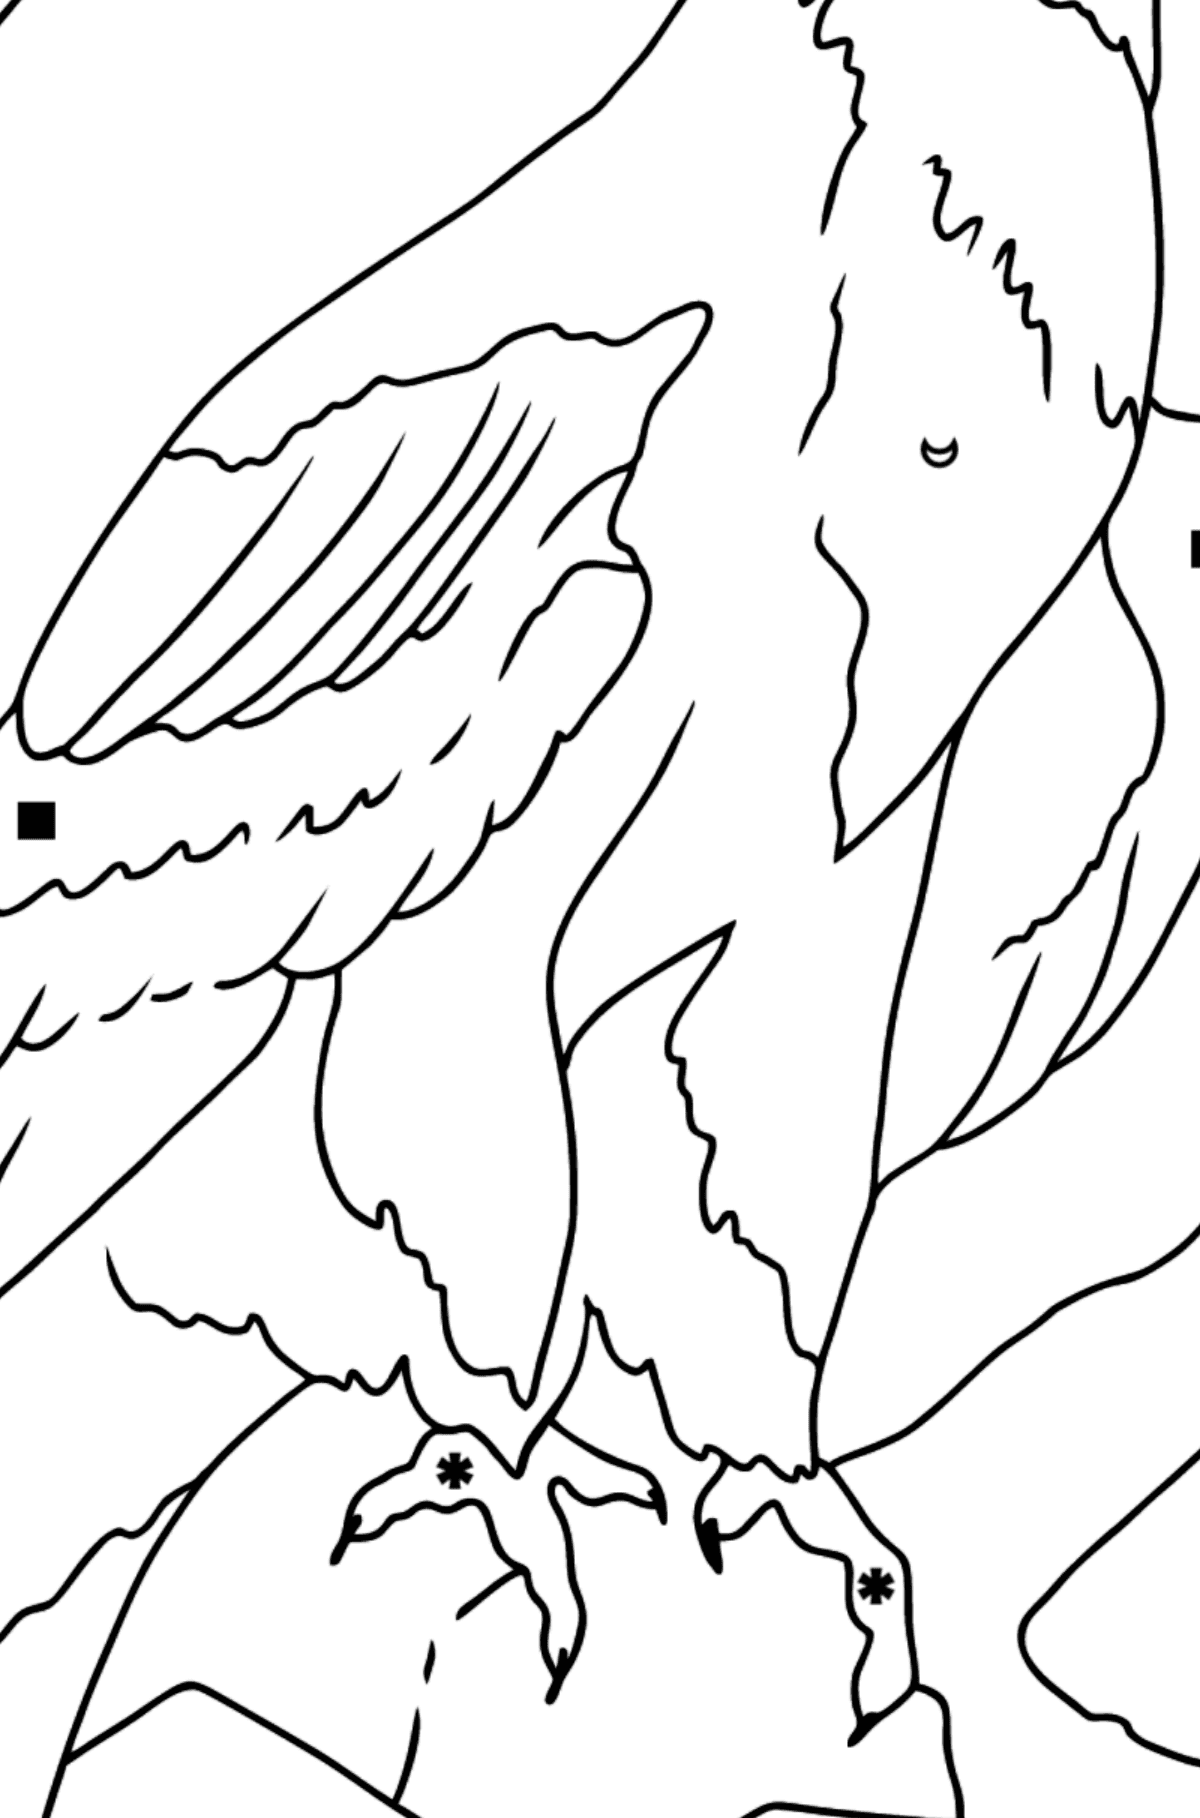 Coloring Page - An Eagle is on the Hunt - Coloring by Symbols for Kids